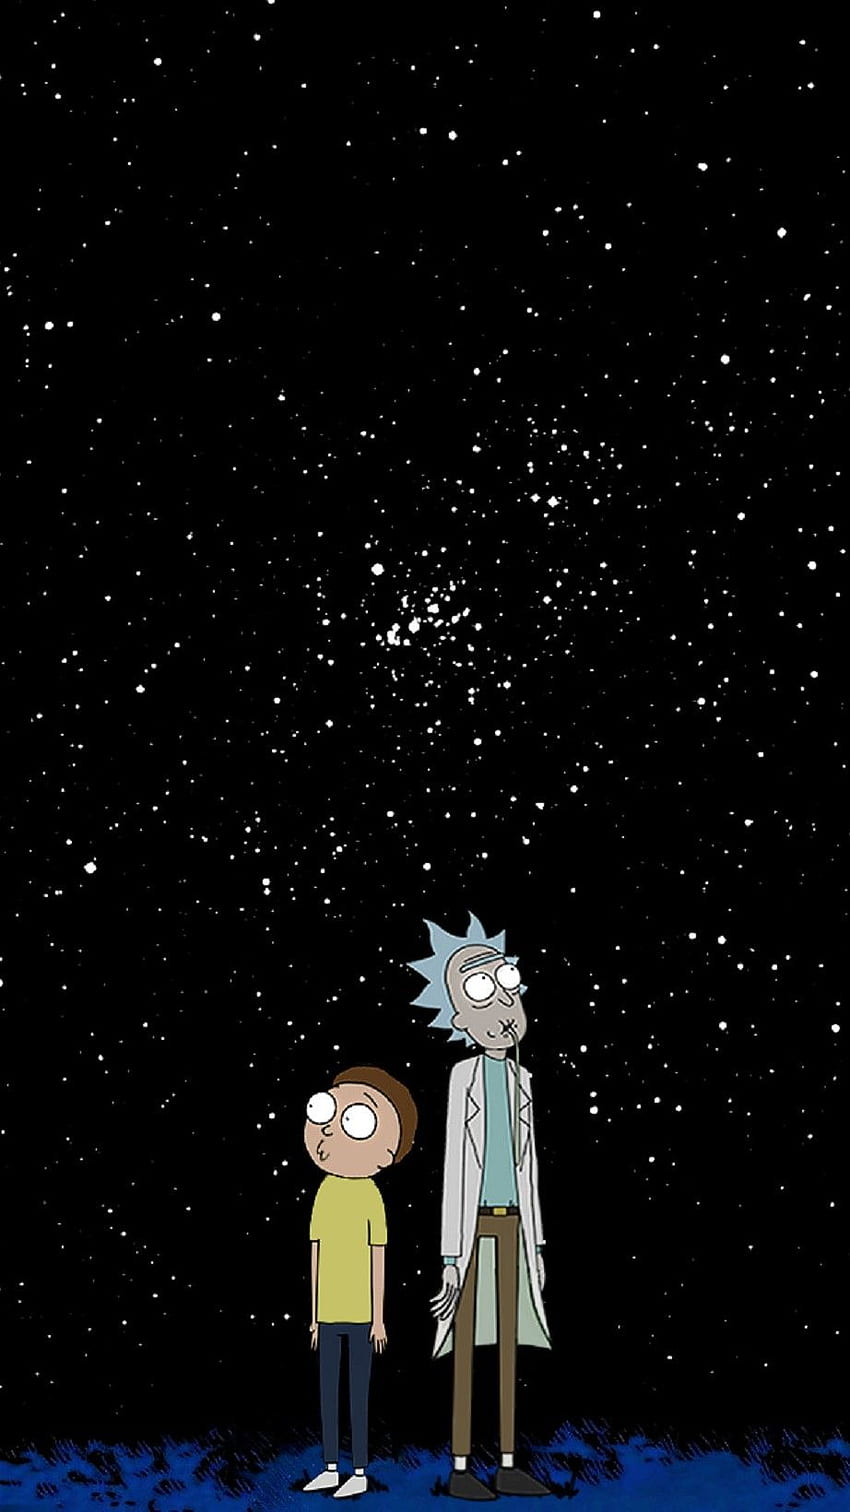 Rick and morty in 2020. Rick and morty 포스터, Rick and morty , Rick and morty 문신, Rick and Morty Aesthetic HD 전화 배경 화면